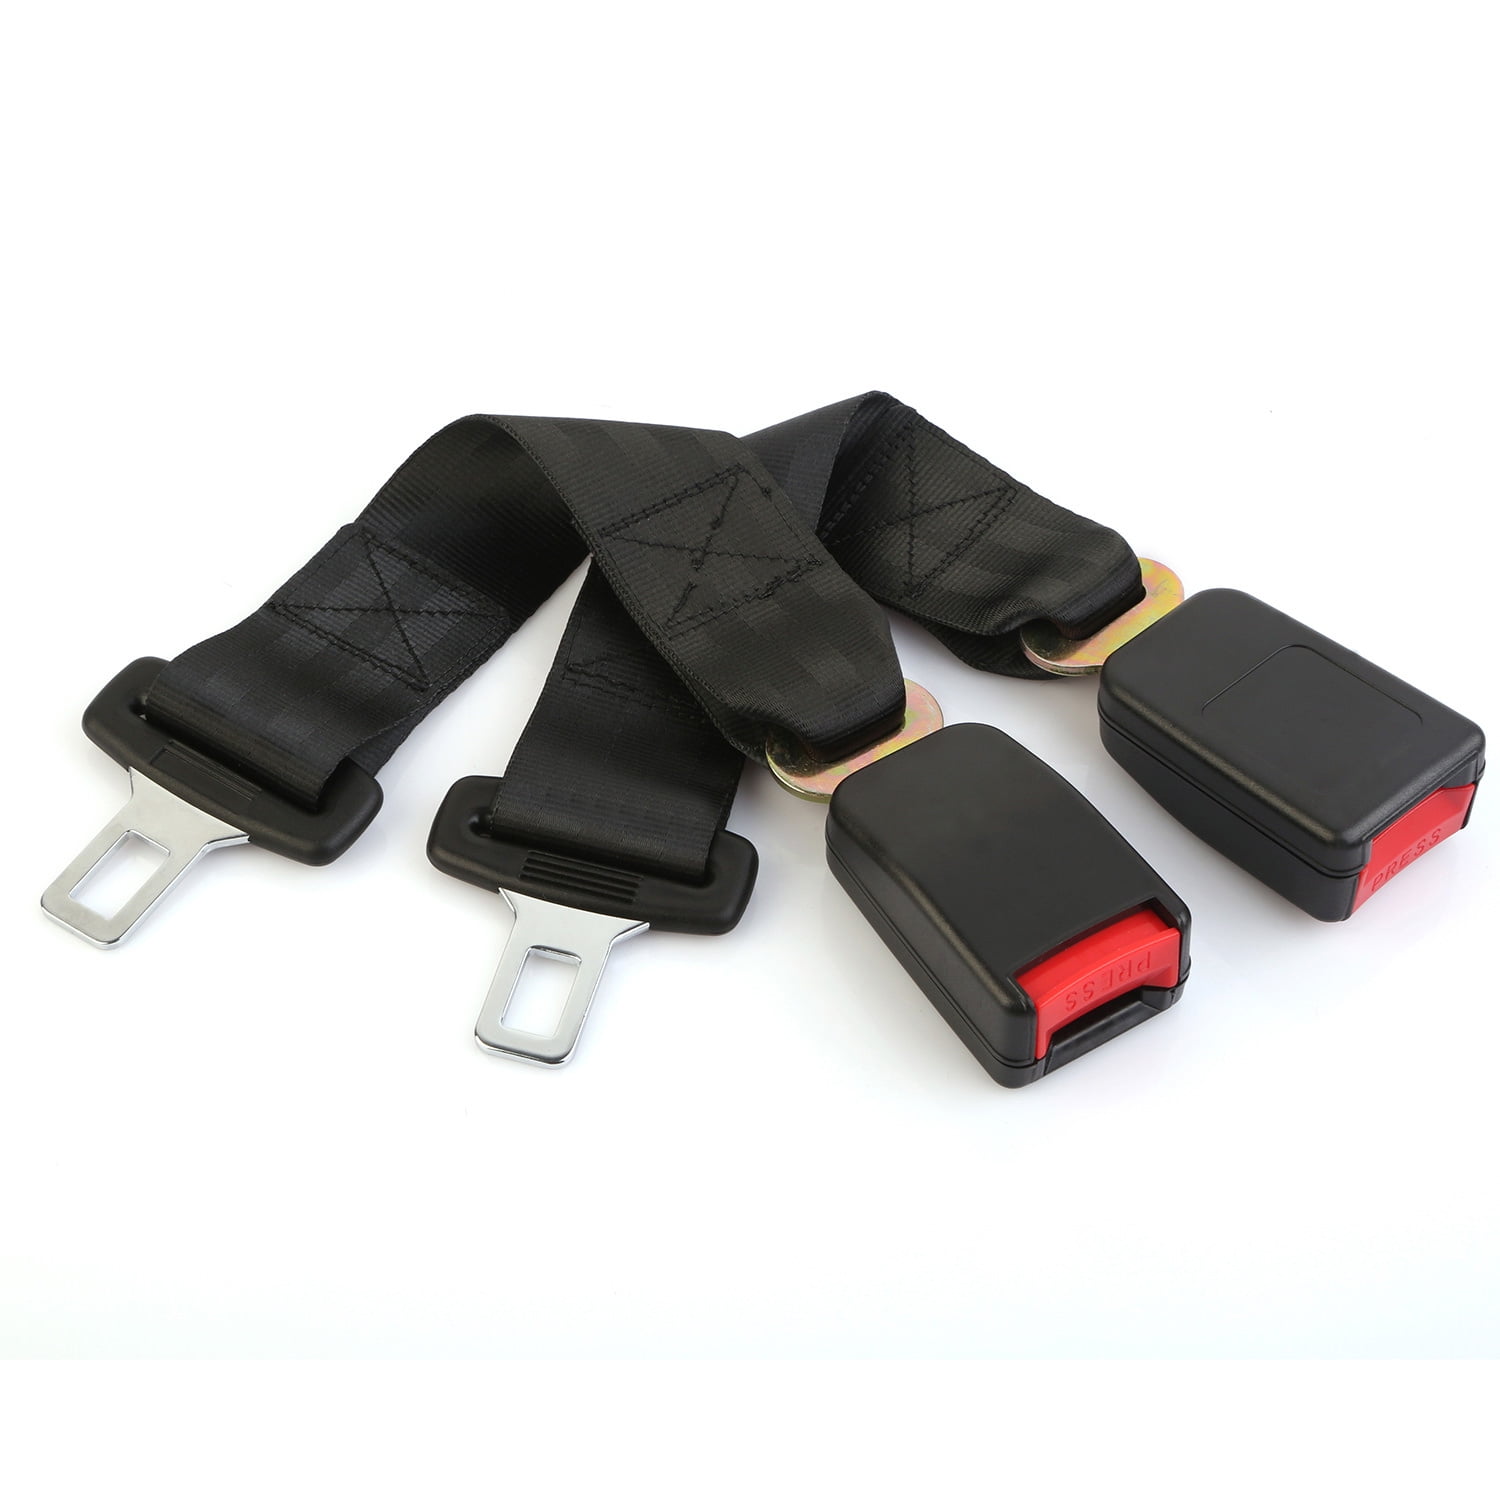 Saefhge Seatbelt Extenders 14 Car Universal Seatbelt Buckle Extender Safety Seat Belt Extension Auto Accessories for Most Cars 2 Packs 